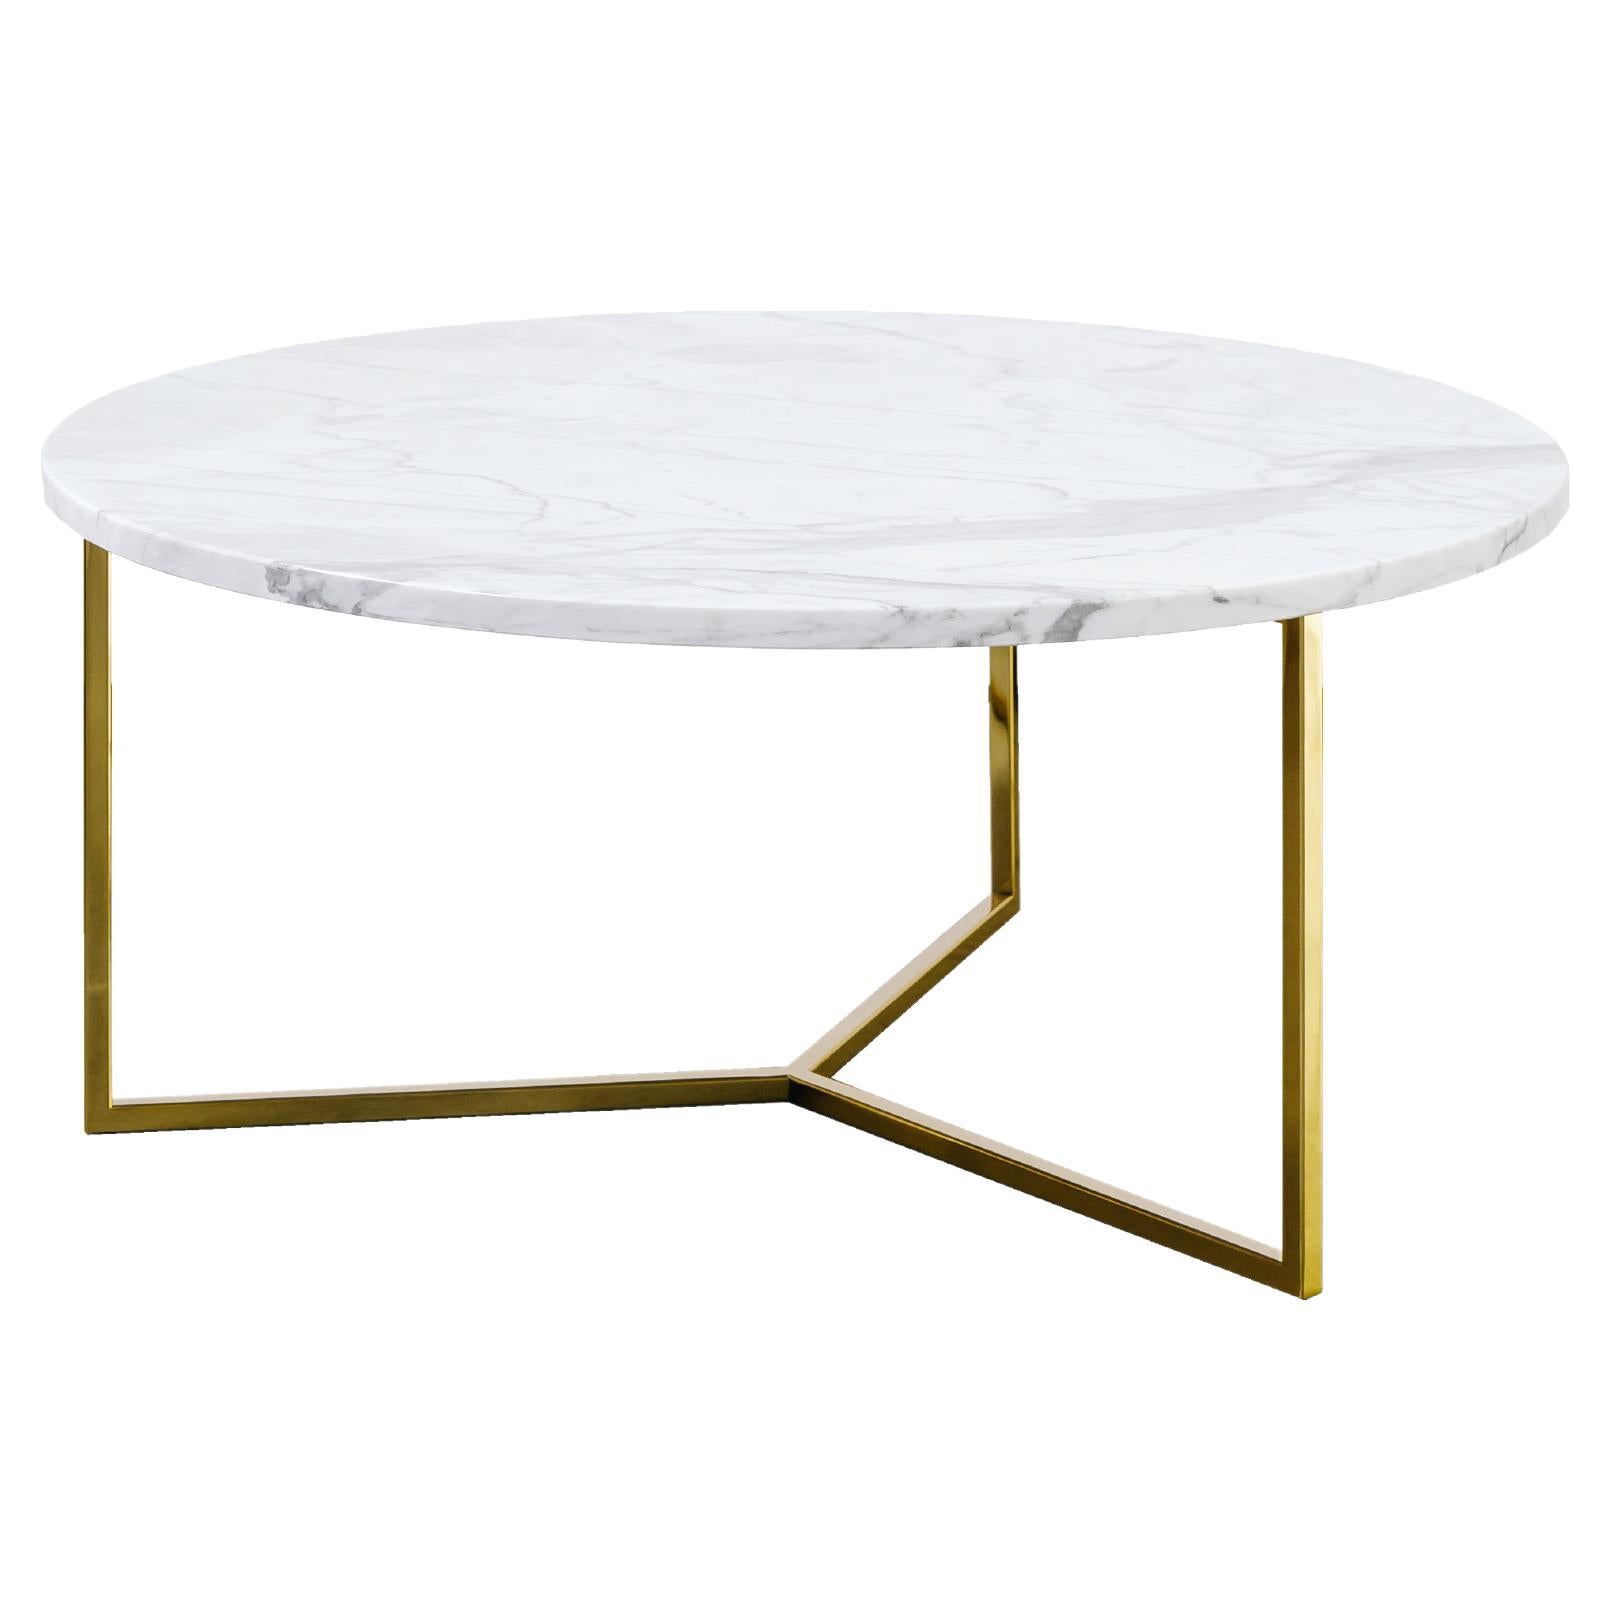 Small White Brass Oval Coffee Table by Un’common